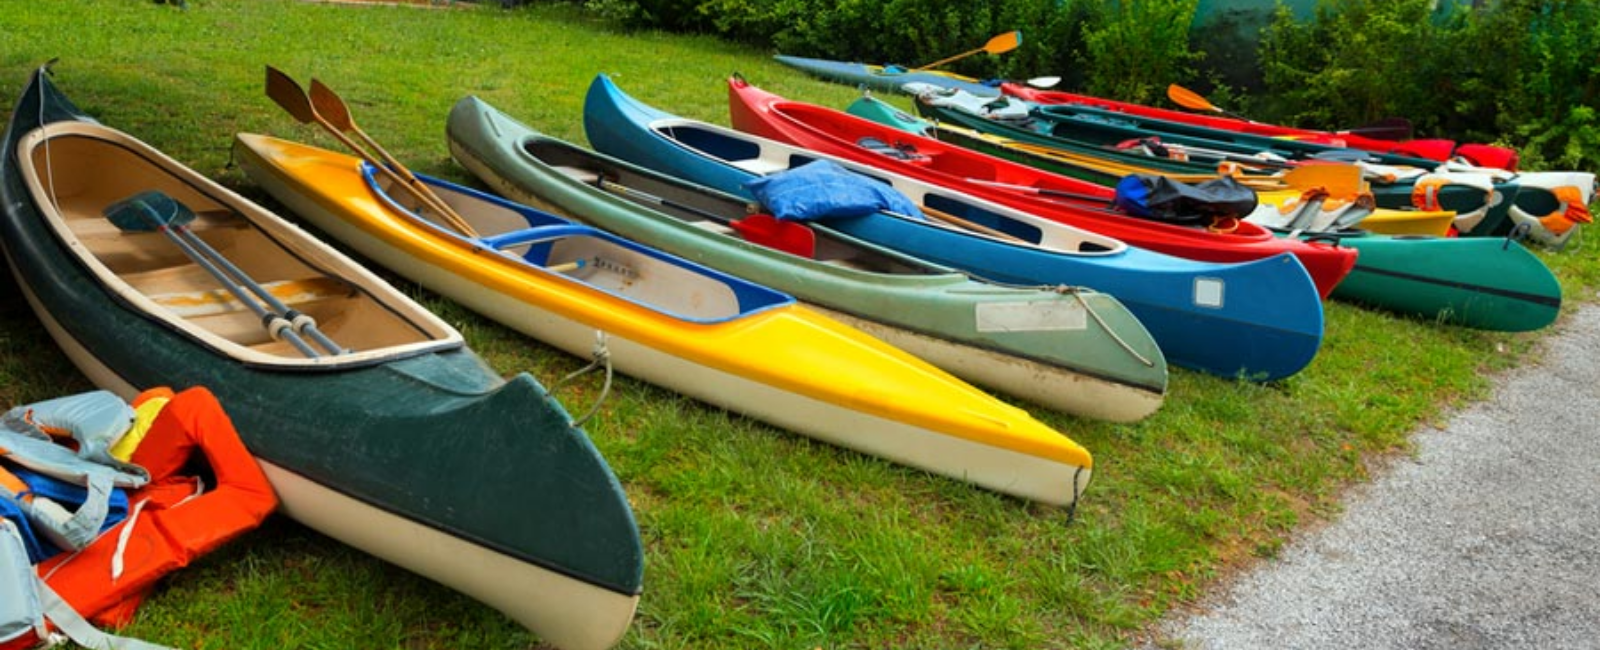 Kayaks and canoes on the grass by a lake